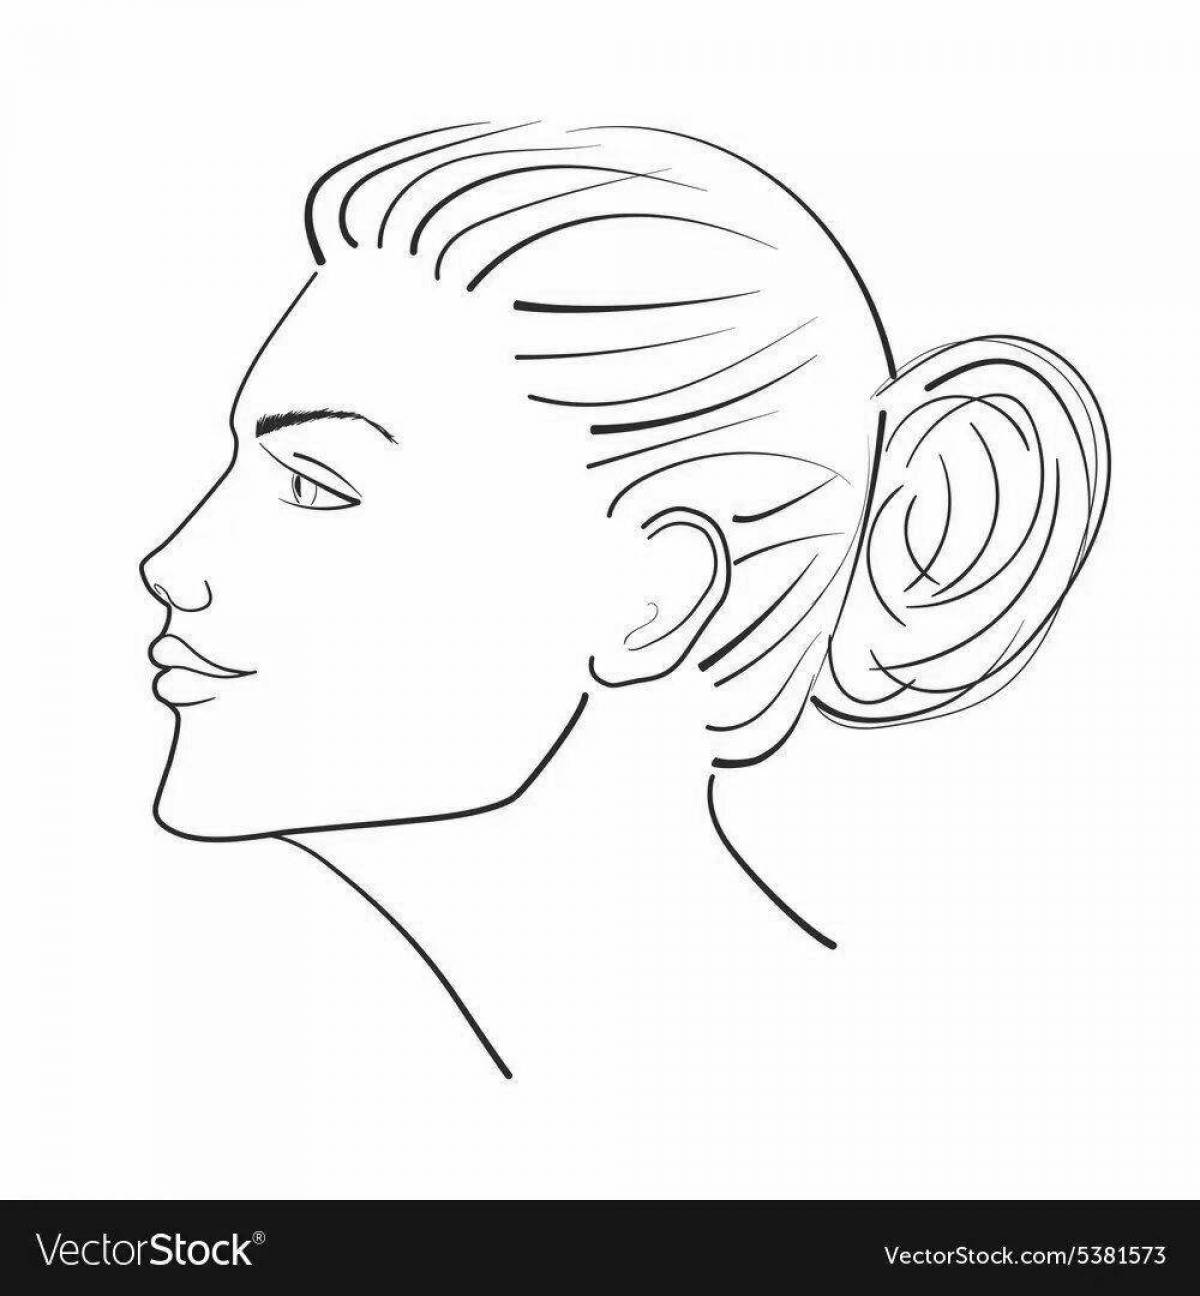 Live profile face coloring page